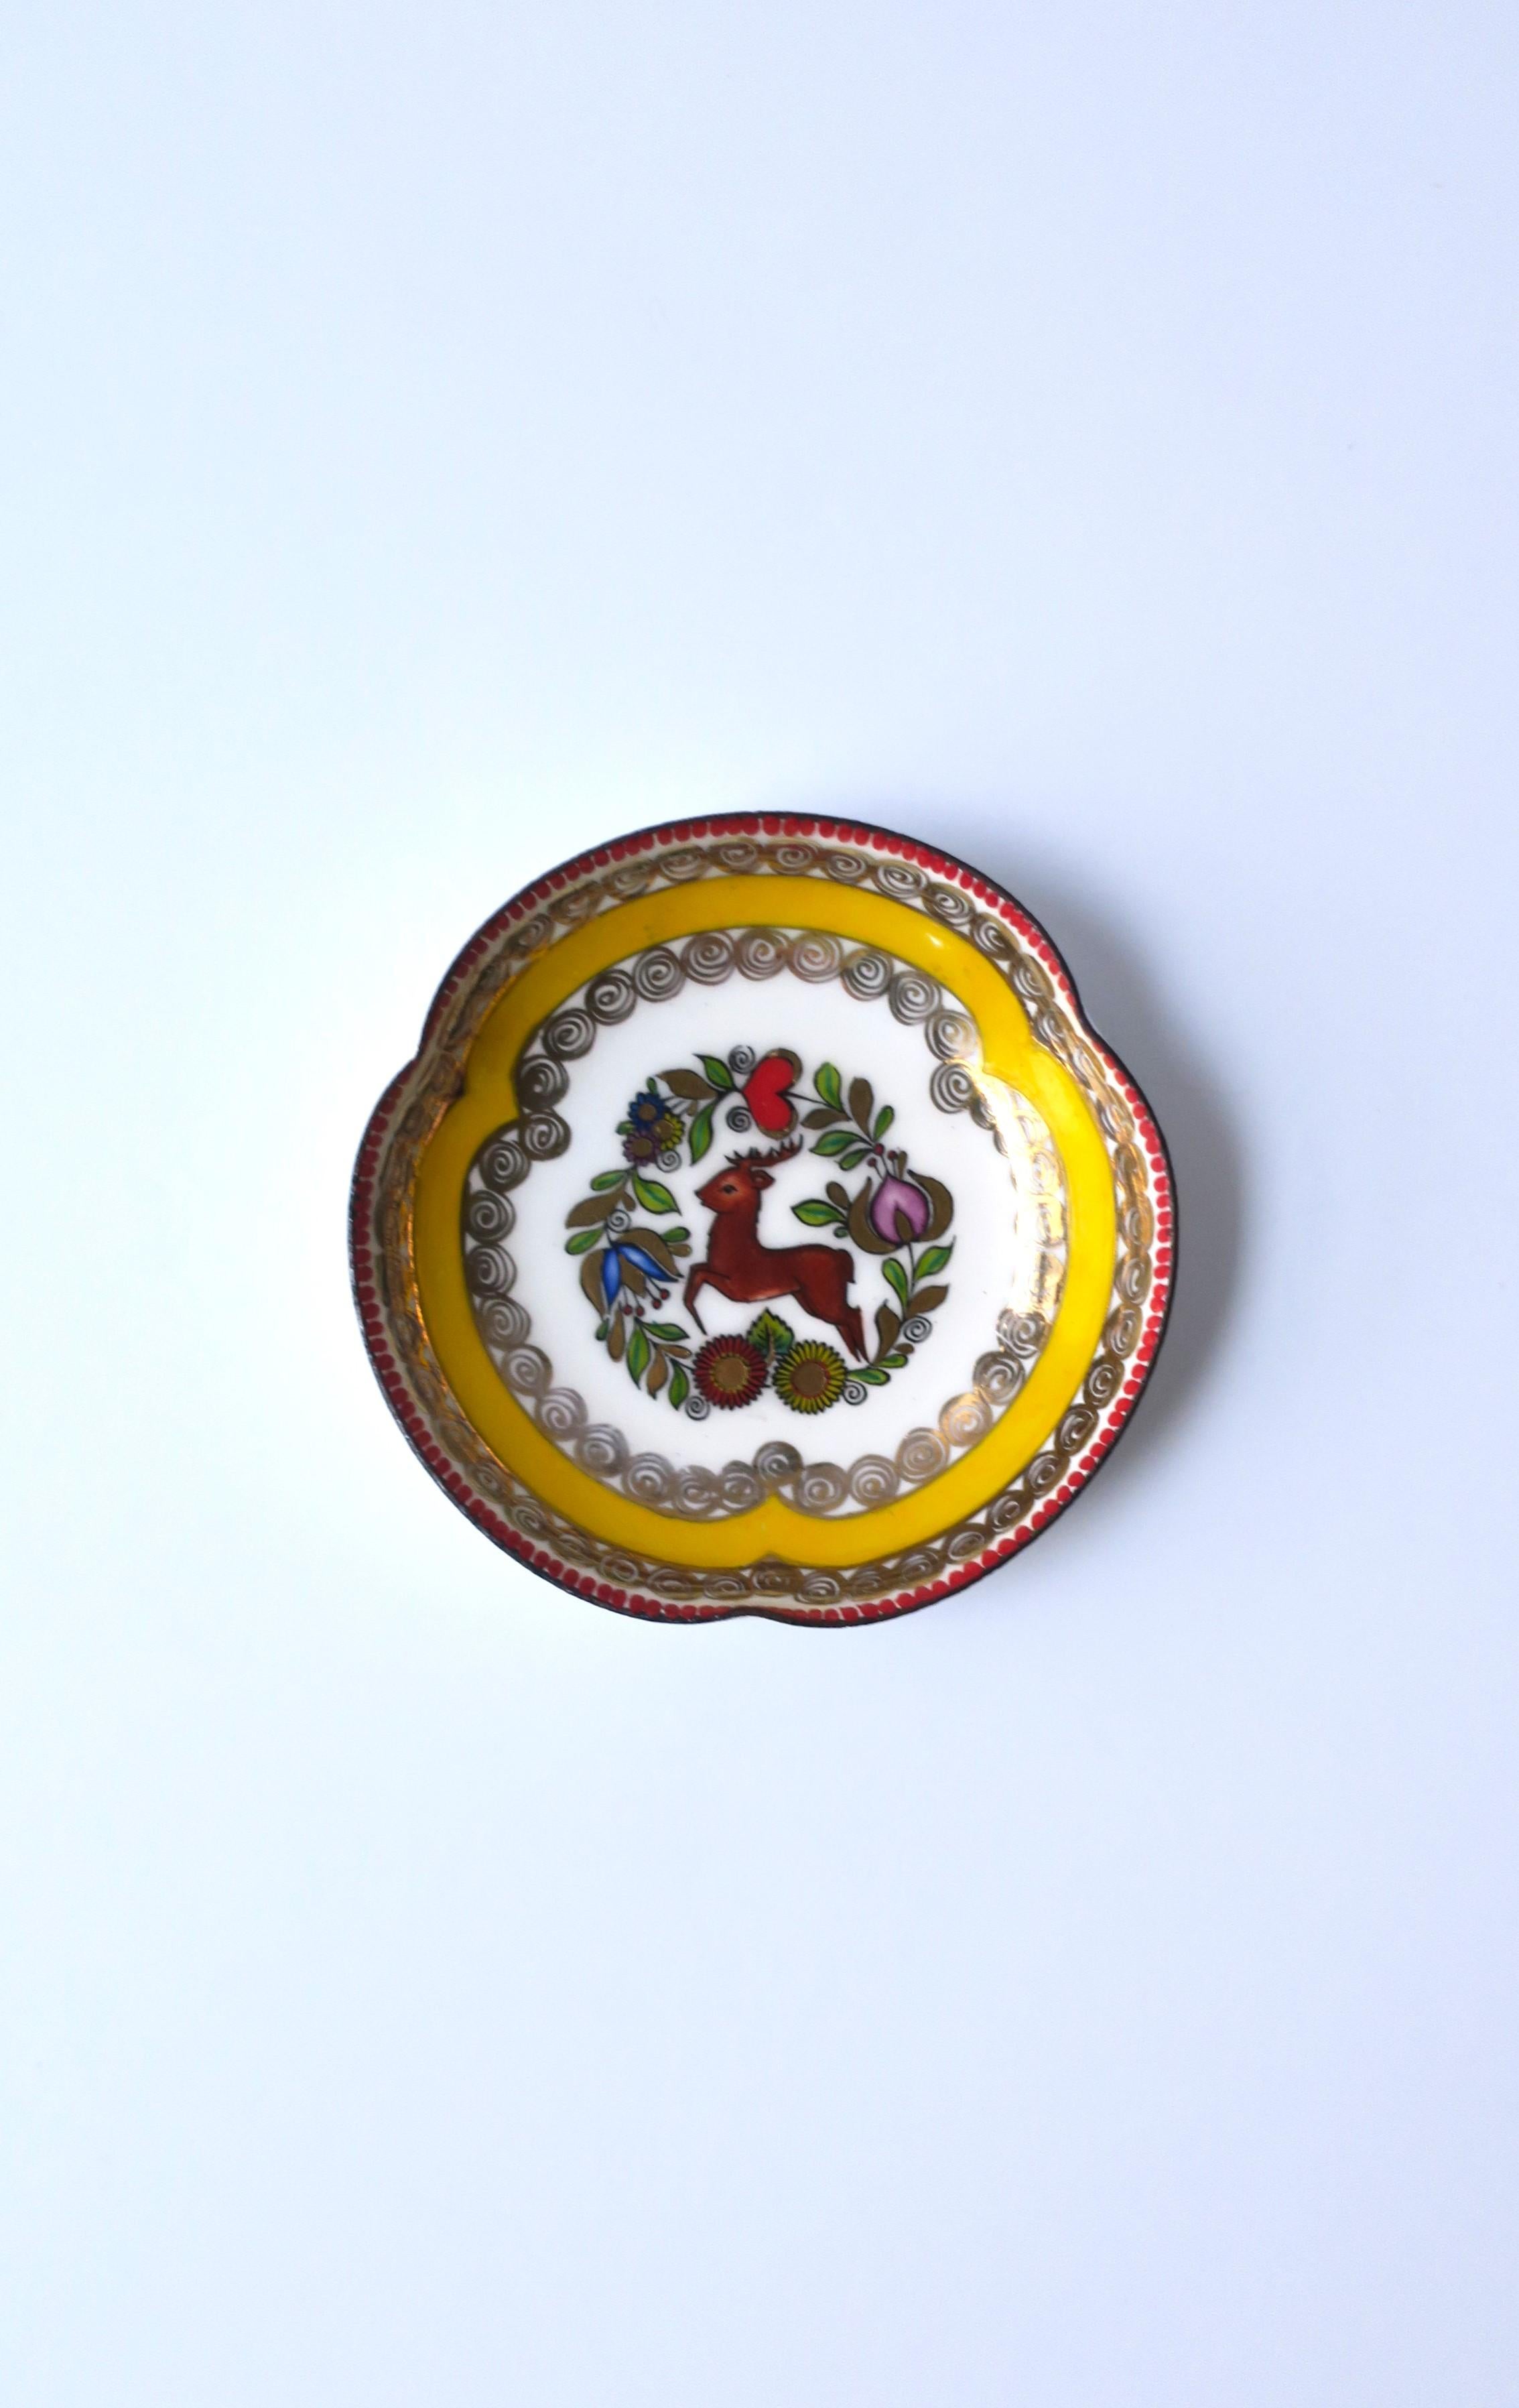 A colorful porcelain enamel Austrian small bowl or jewelry dish, circa mid-20th century, Austria. Dish, with a white enamel ground, features detailed Austrian stag deer at center, finished with yellow and gold detail around inside edge. A great